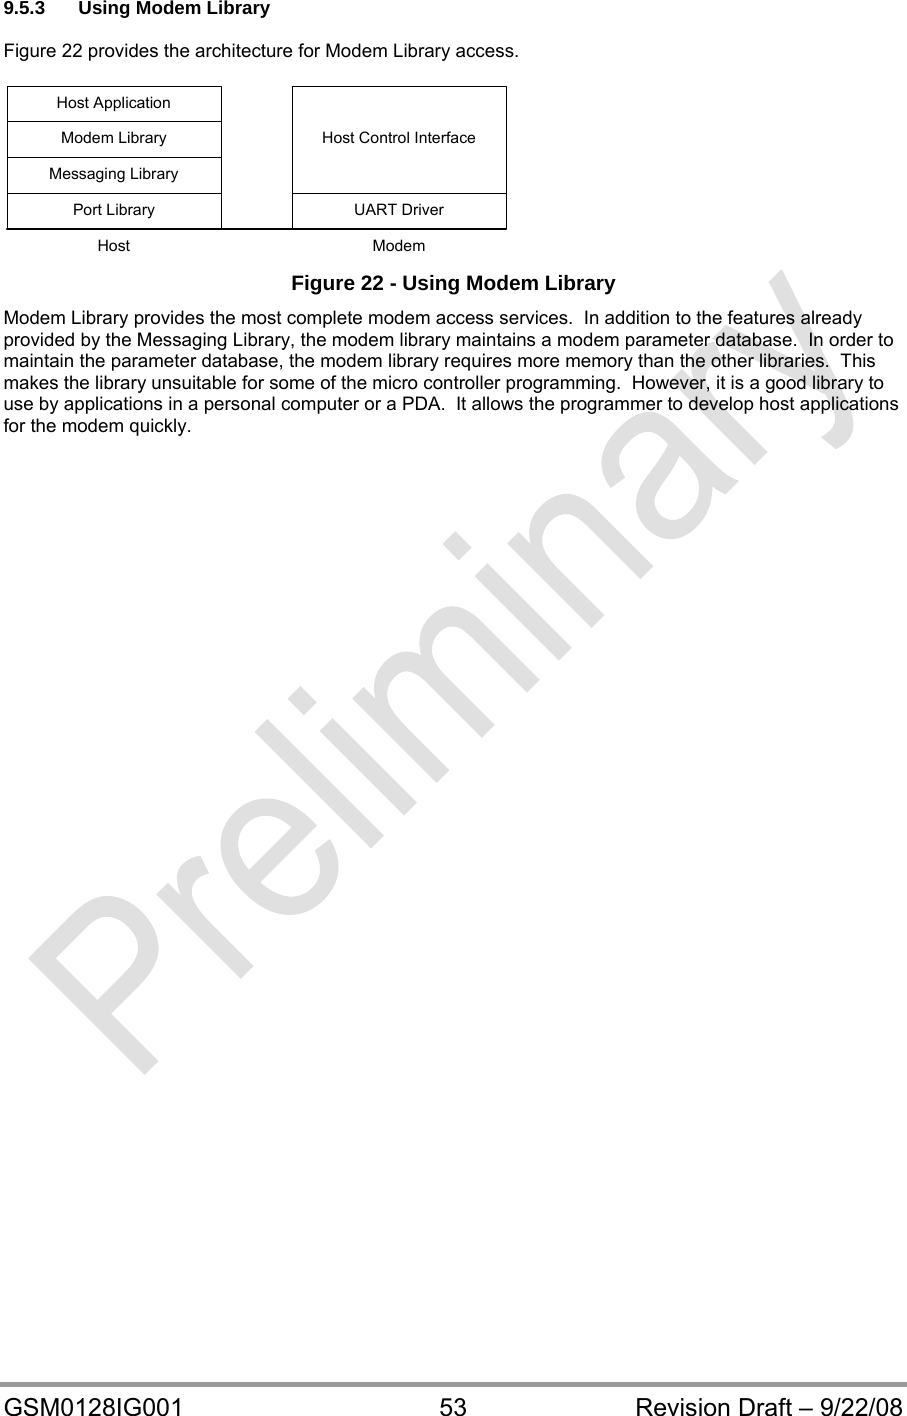  GSM0128IG001  53  Revision Draft – 9/22/08 9.5.3  Using Modem Library   Figure 22 provides the architecture for Modem Library access.  UART DriverPort LibraryHost Control InterfaceMessaging LibraryModem LibraryHost ApplicationHost Modem  Figure 22 - Using Modem Library Modem Library provides the most complete modem access services.  In addition to the features already provided by the Messaging Library, the modem library maintains a modem parameter database.  In order to maintain the parameter database, the modem library requires more memory than the other libraries.  This makes the library unsuitable for some of the micro controller programming.  However, it is a good library to use by applications in a personal computer or a PDA.  It allows the programmer to develop host applications for the modem quickly.   